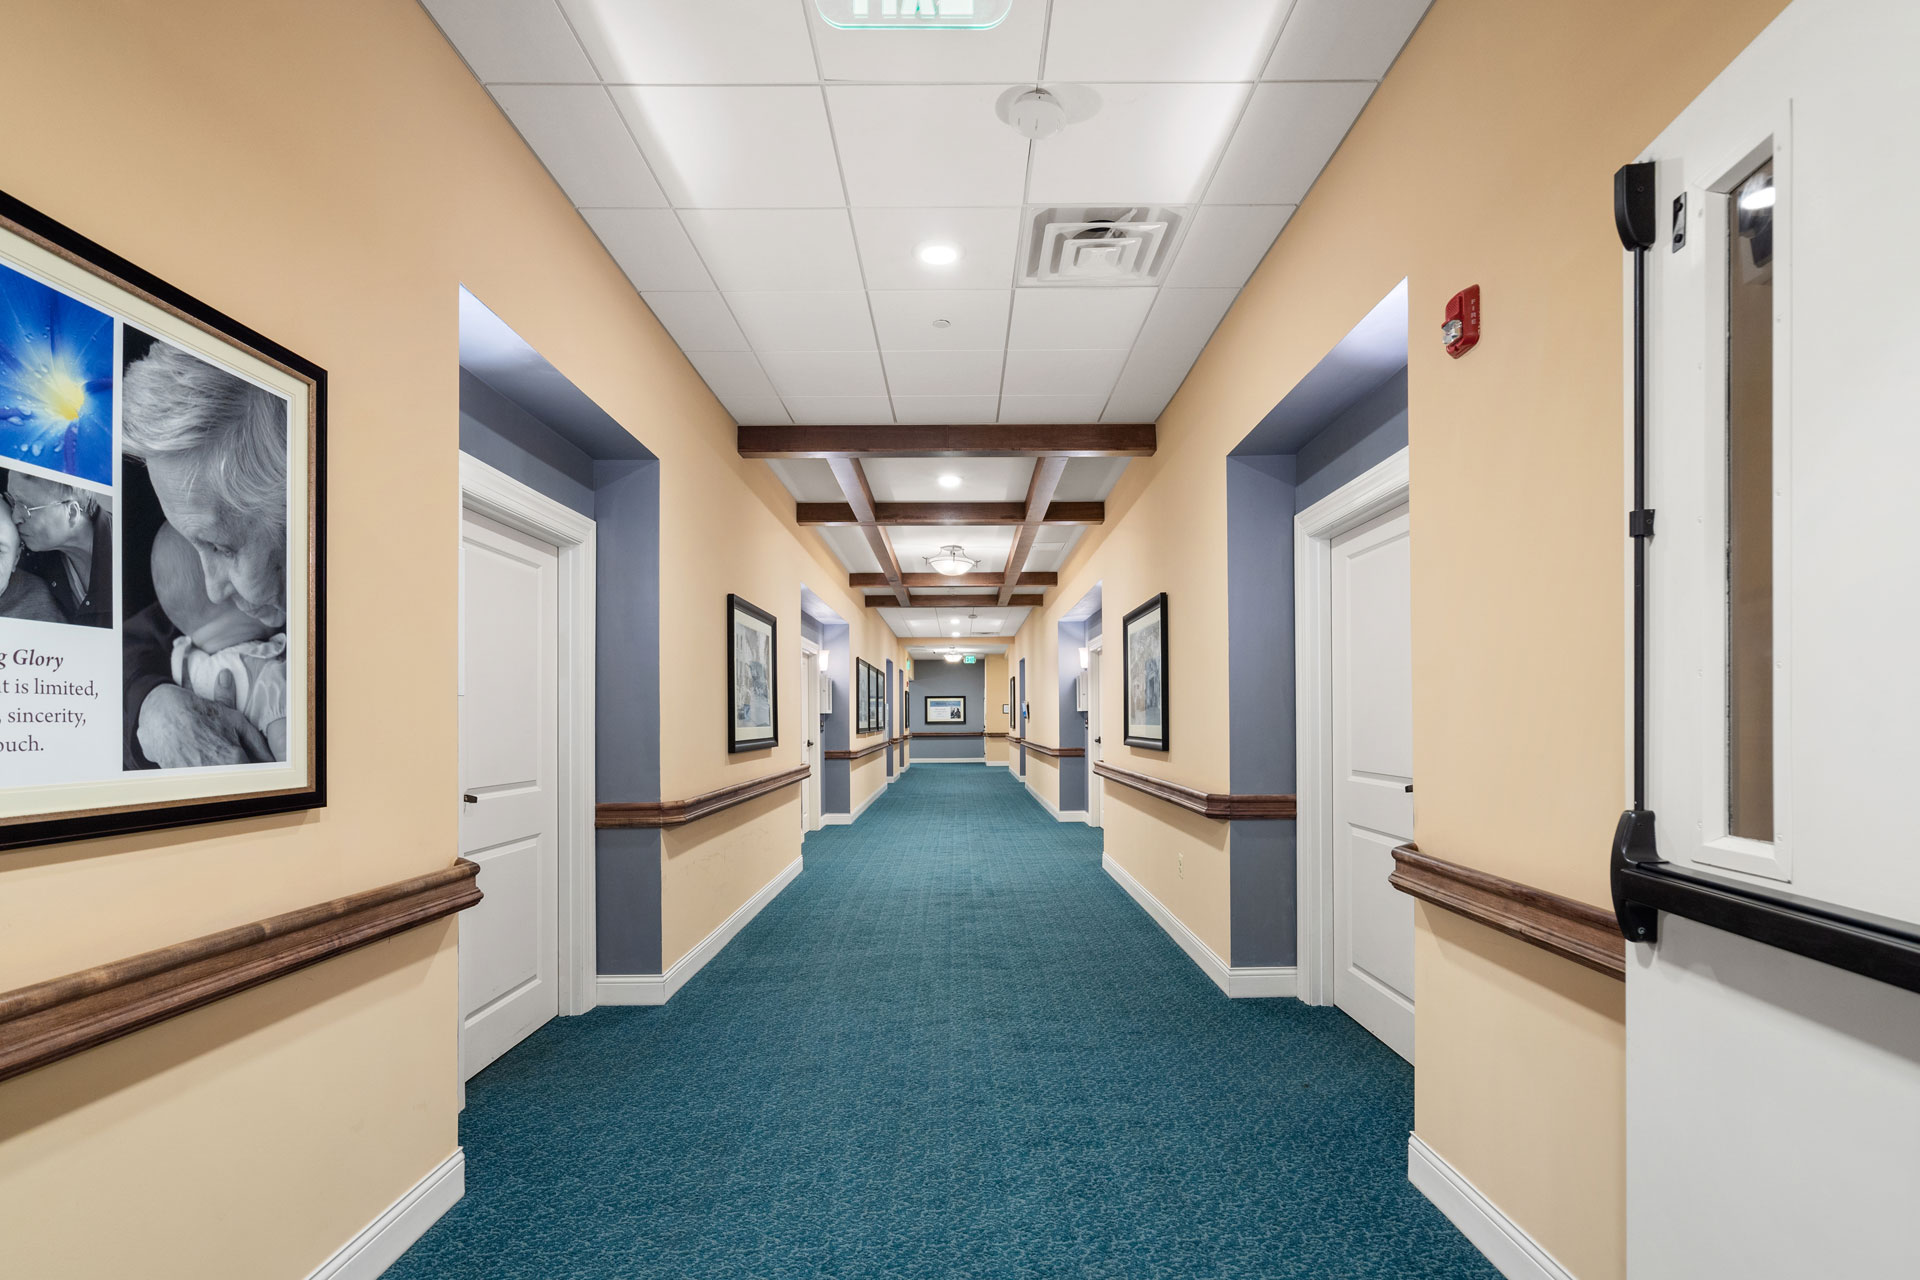 Hallway with tan walls and blue carpet